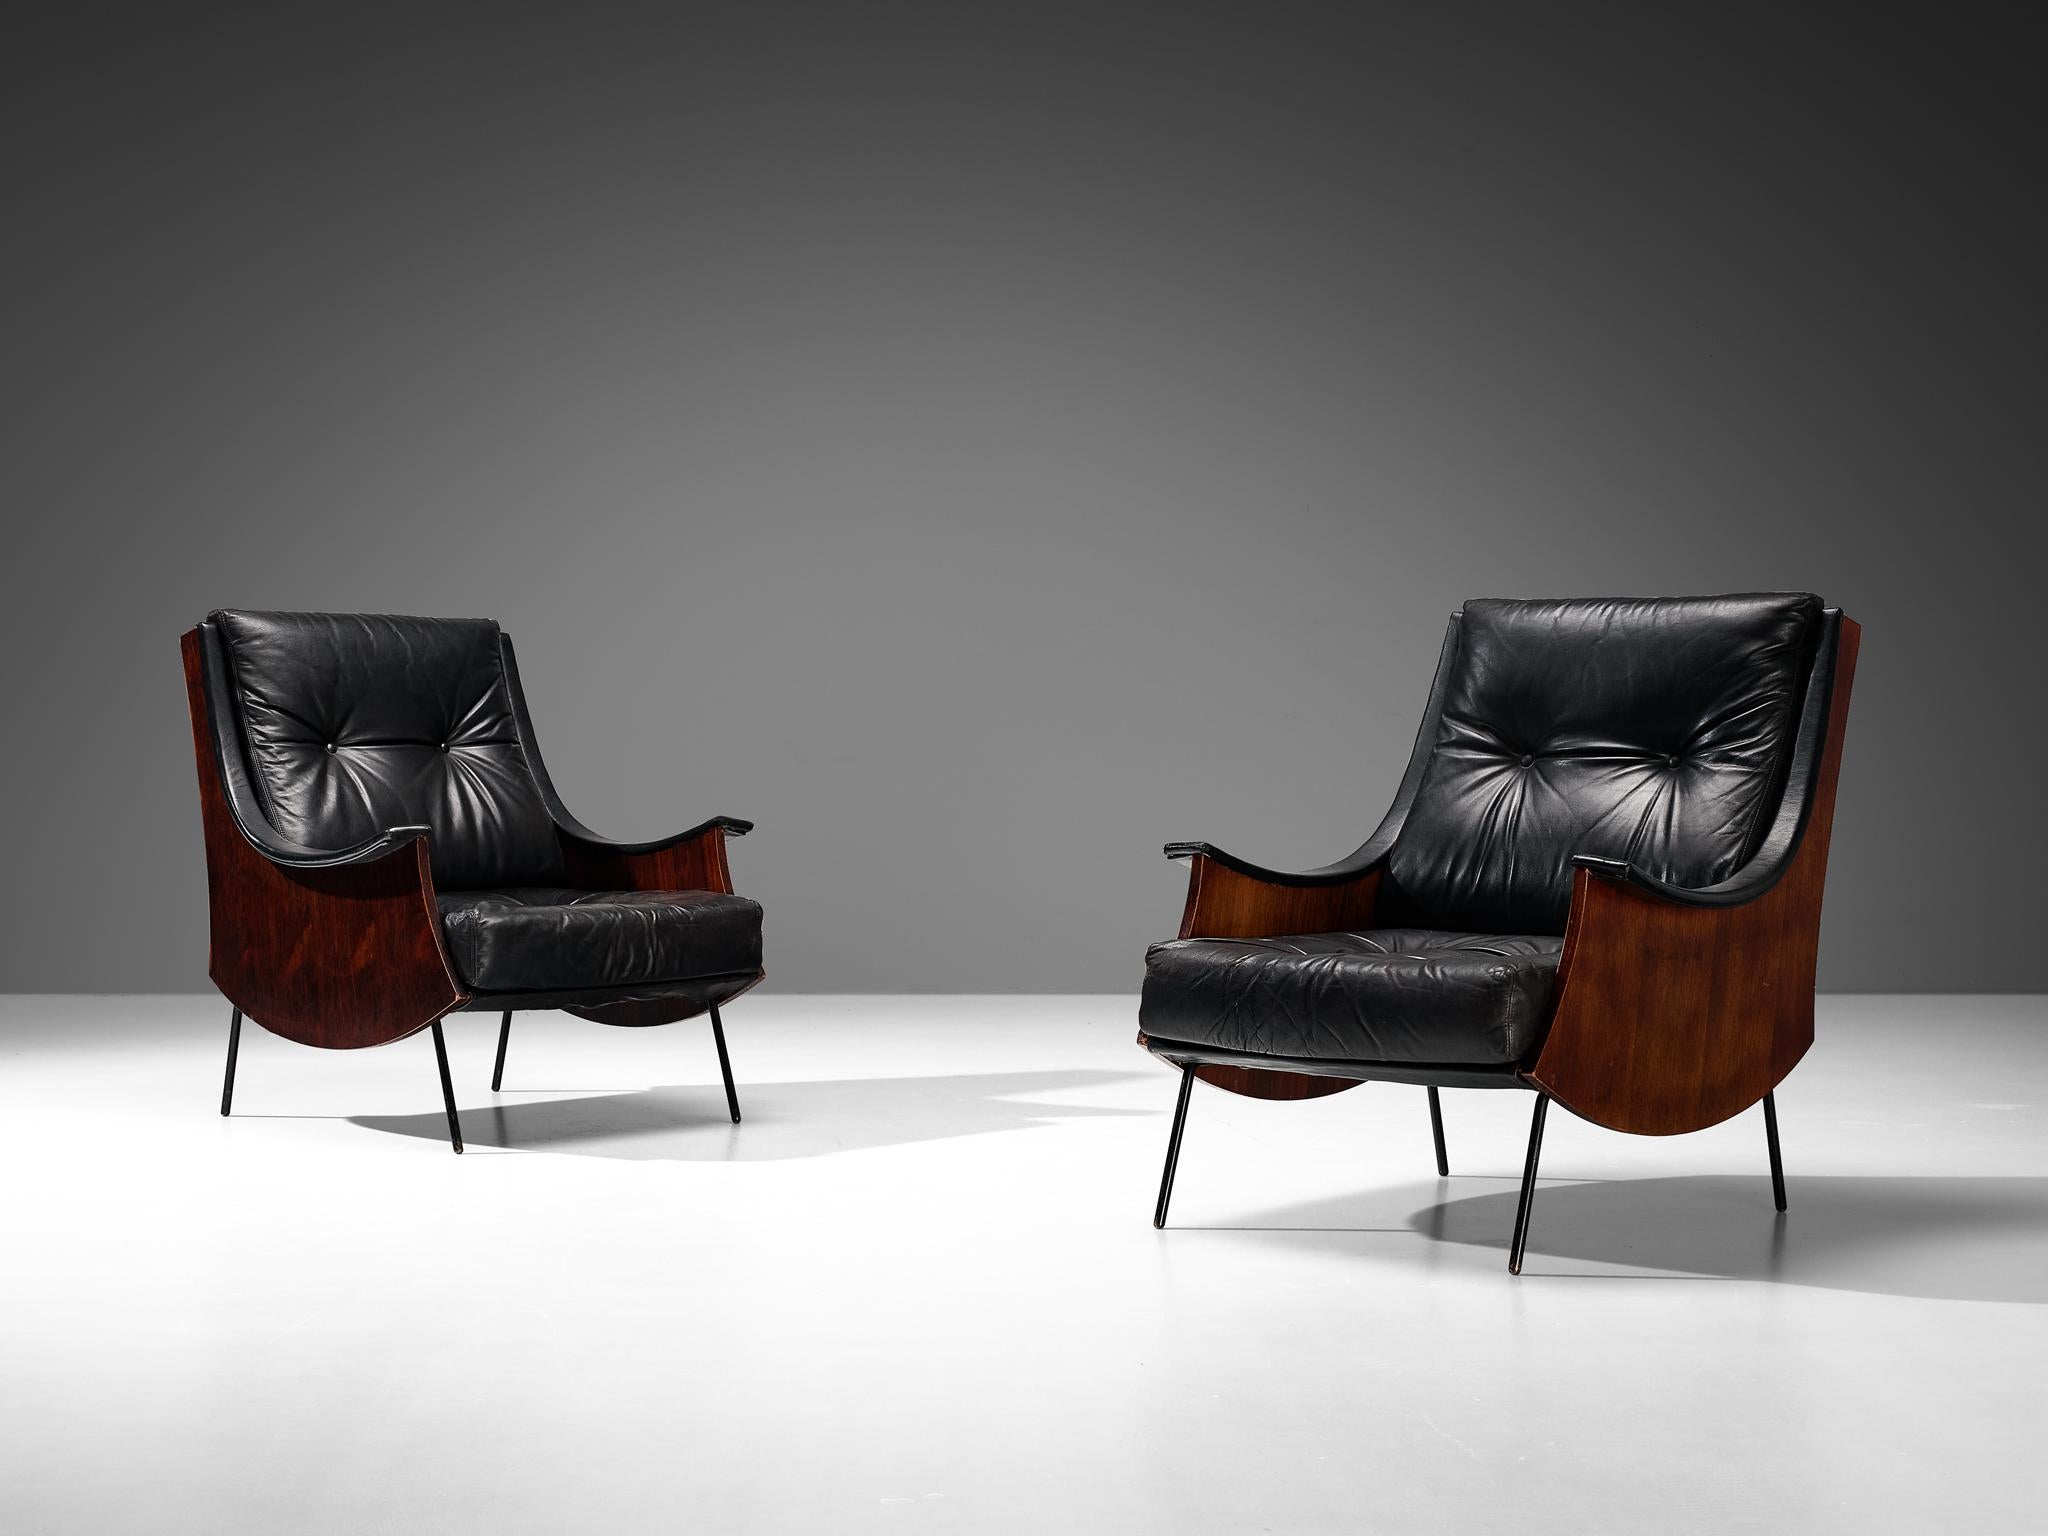 Carlo de Carli for Sormani, pair of 'PIPA' lounge chairs, wood, metal and leather, Italy, circa 1963.

A pair of 'PIPA' lounge chairs, designed by the Italian Carlo de Carli in circa 1963. He designed this model as a homage to his Professor Gio